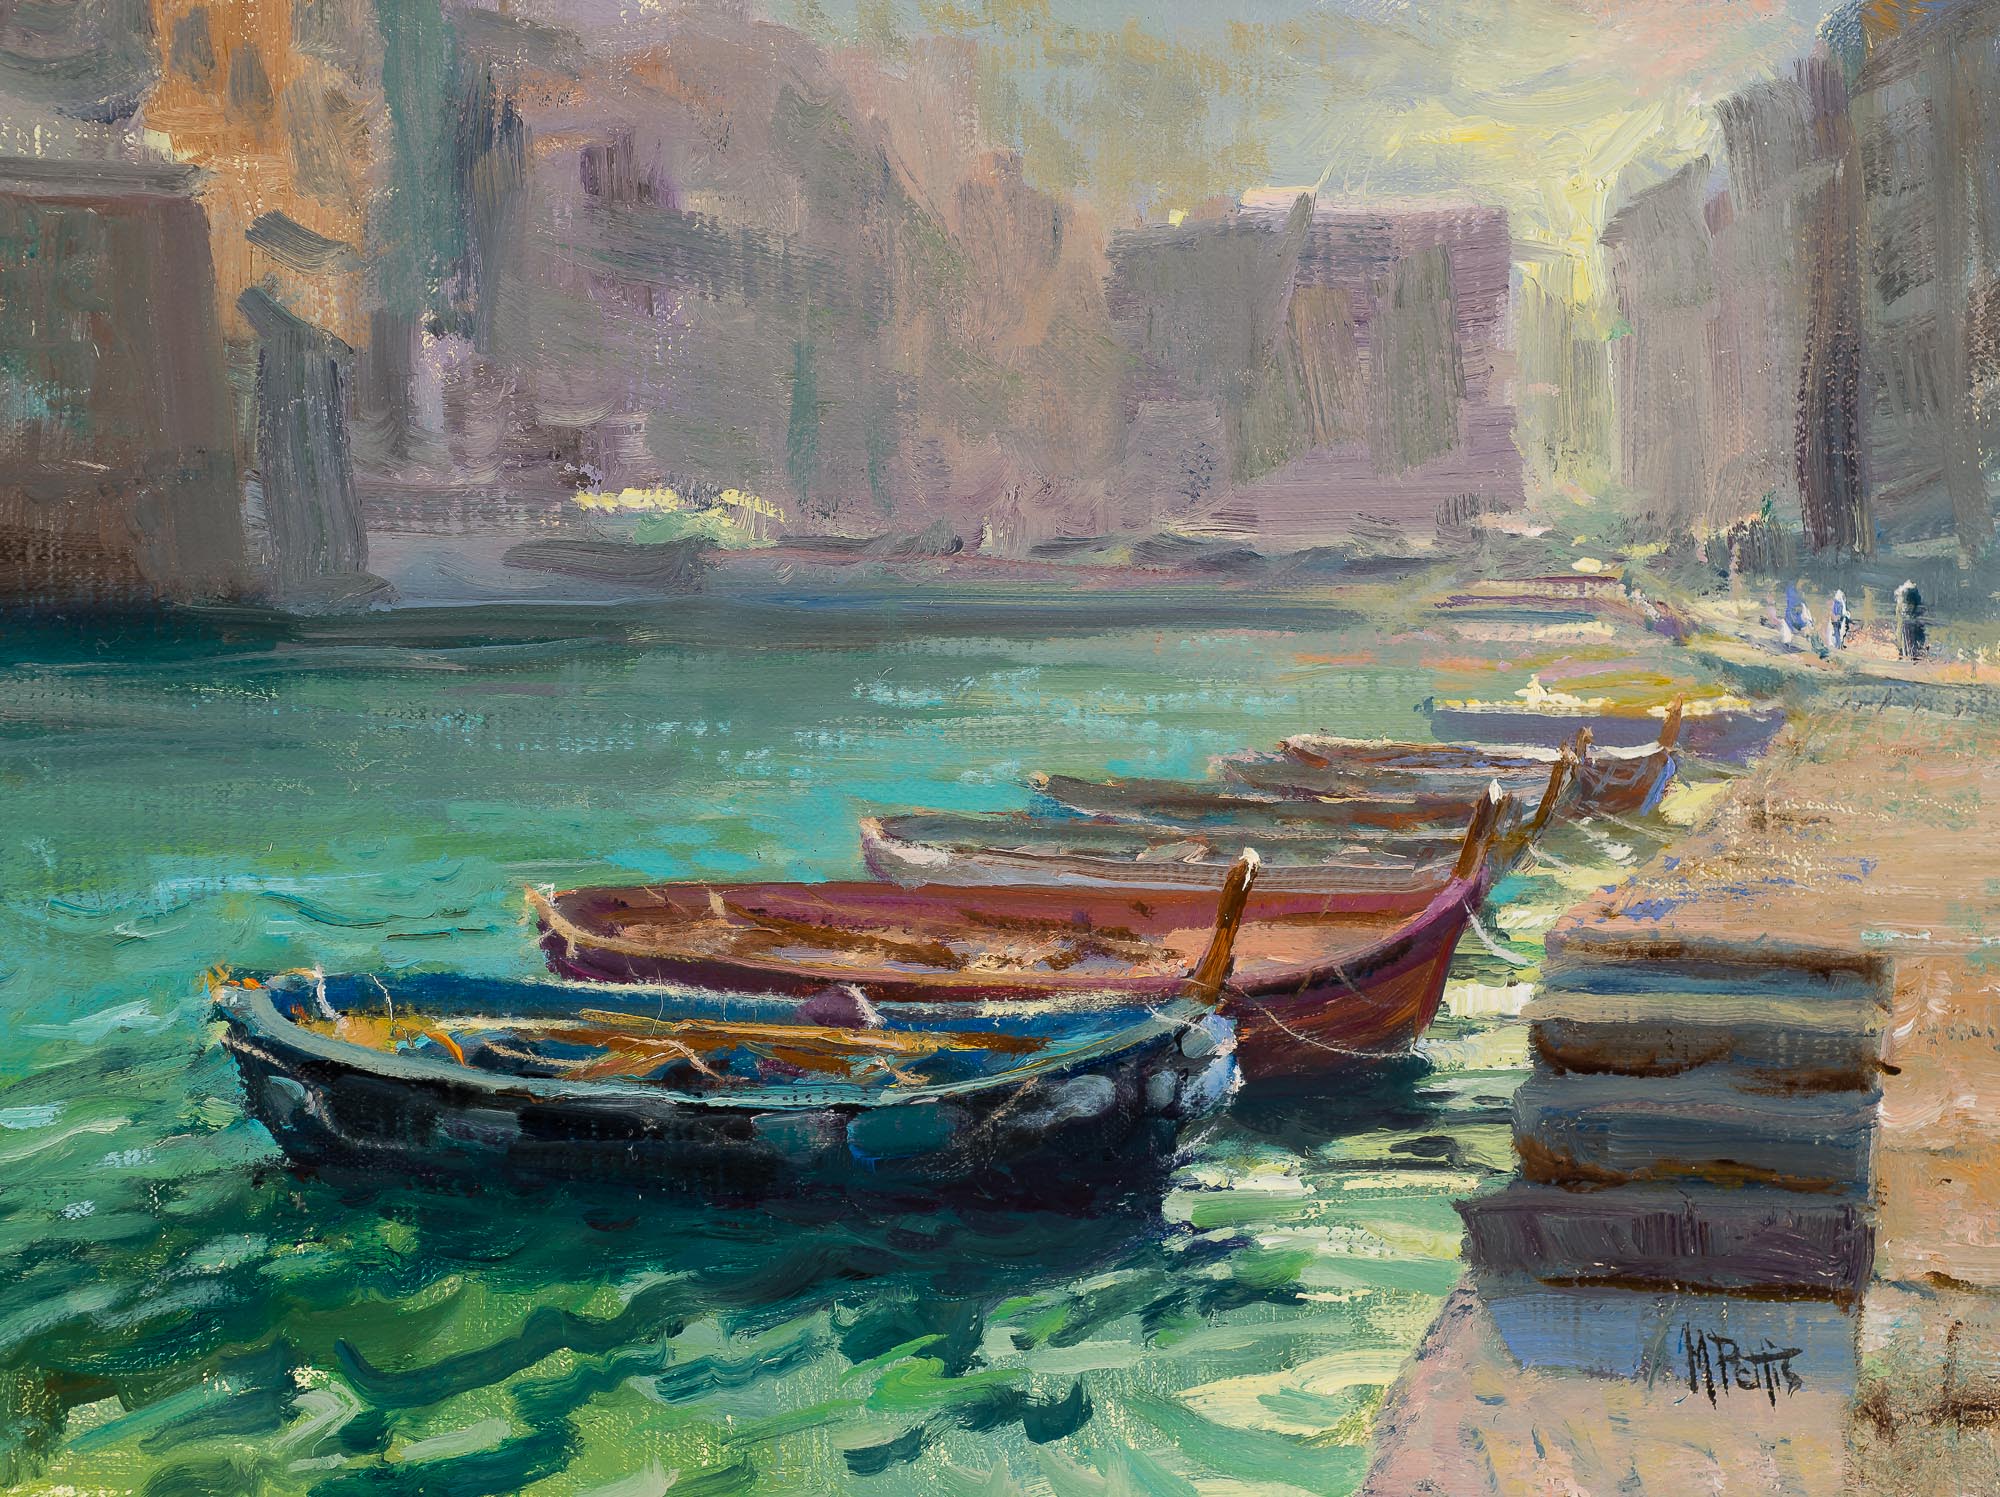 6. Mary Pettis, “Fishingboats — Vernazza,” 2019, oil, 9 x 12 in., Available from artist, Plein air painting